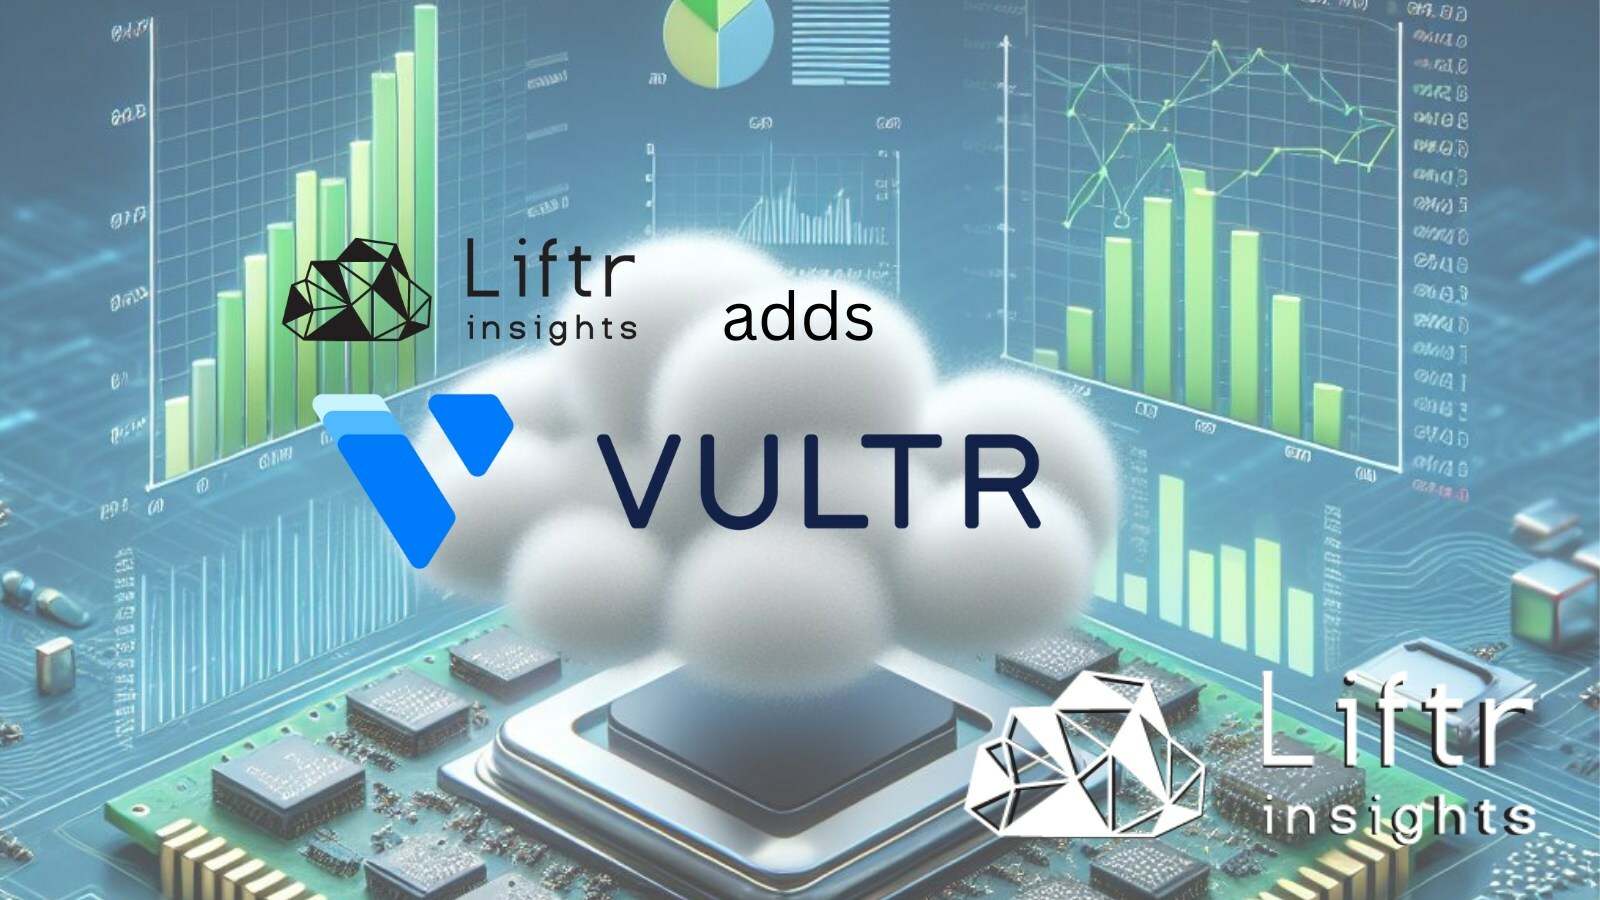 Liftr Insights adds Vultr as latest cloud service provider in its data set